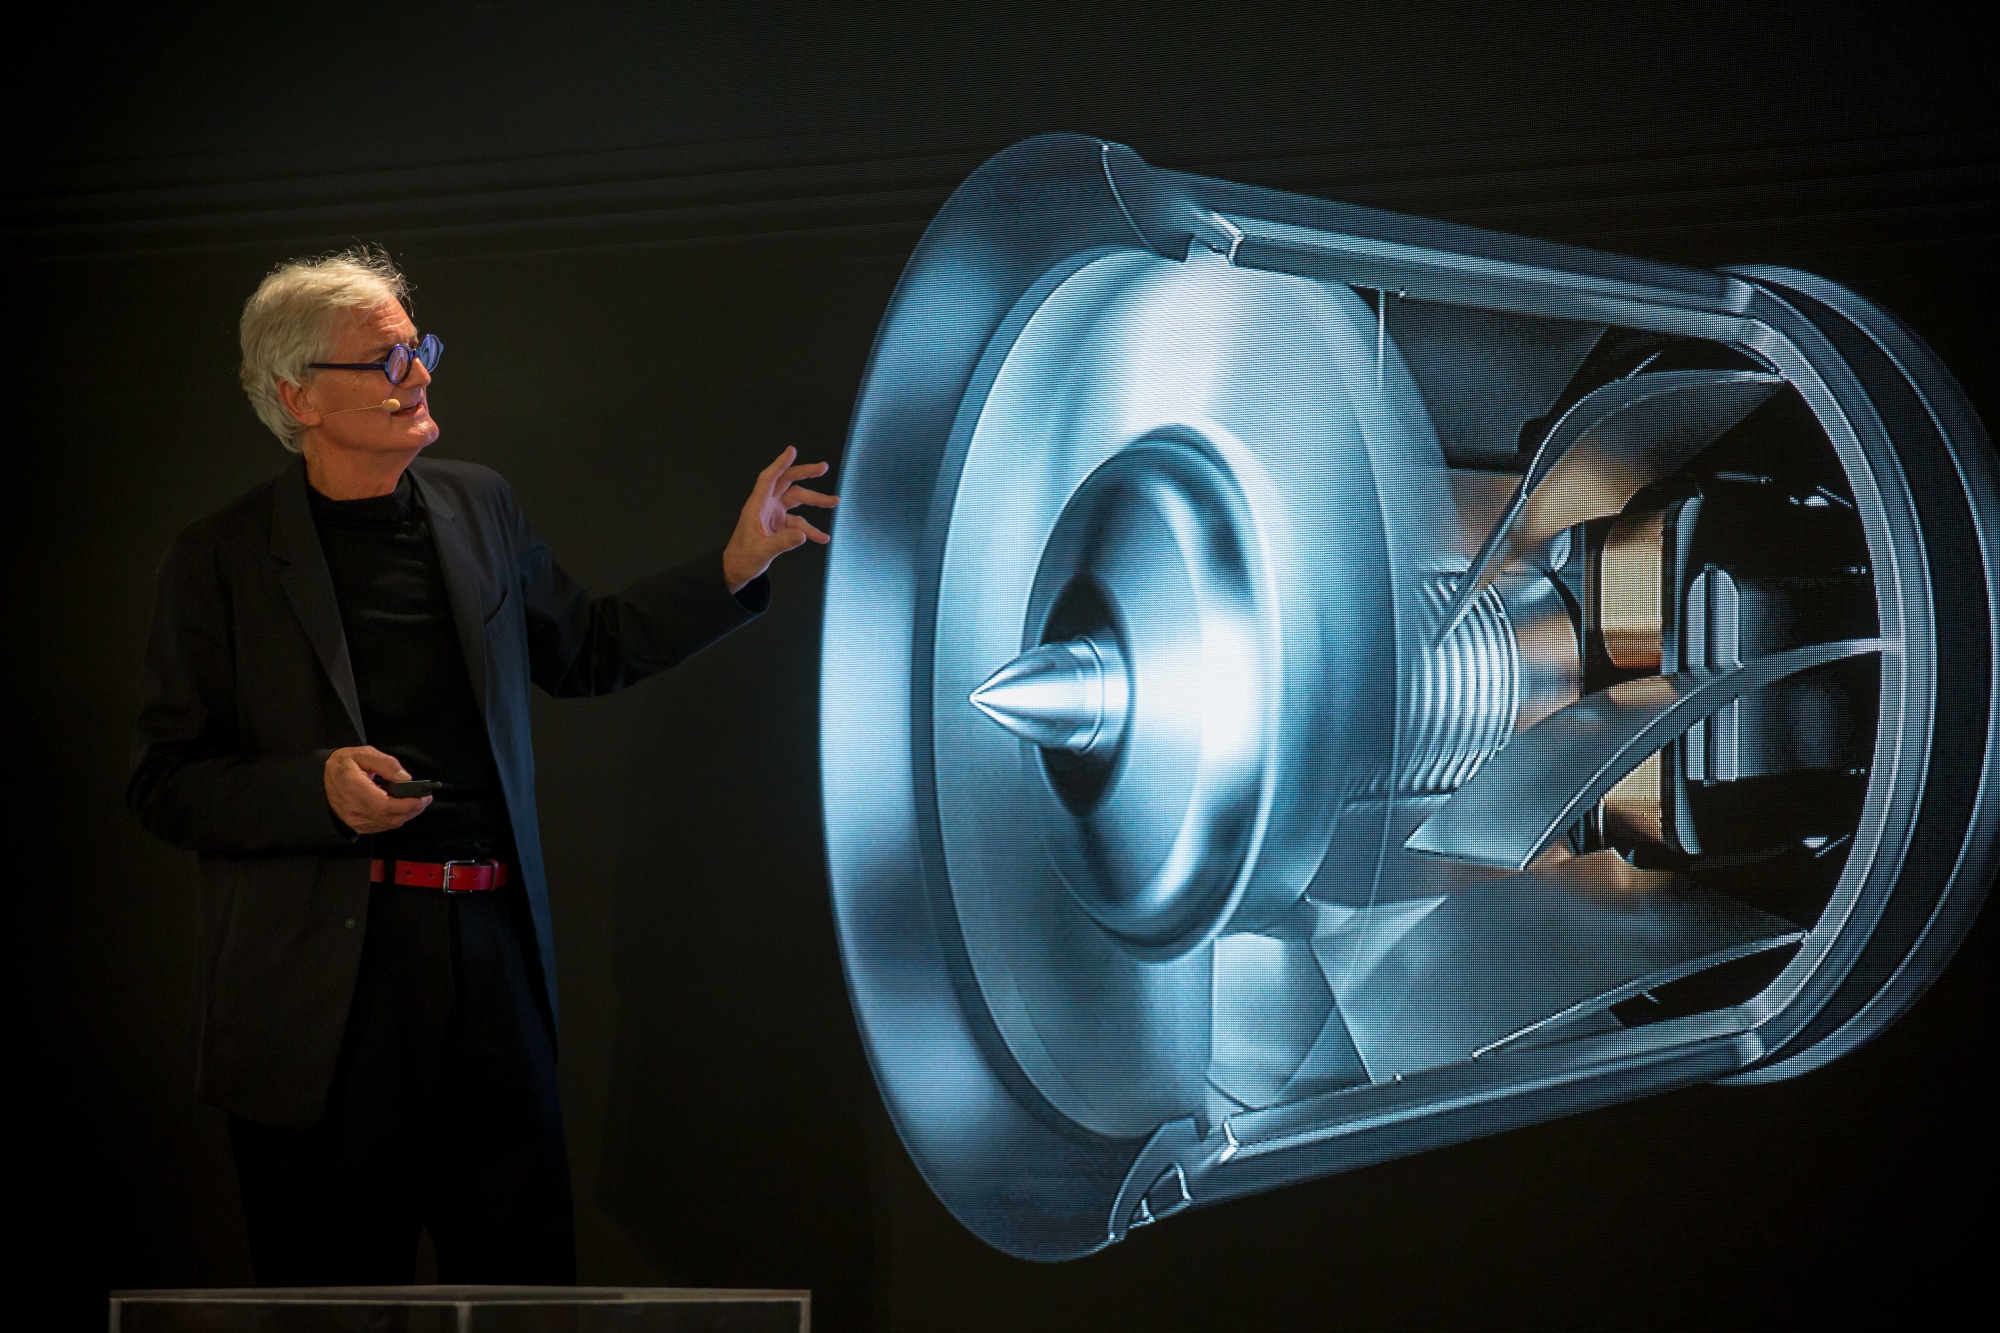 James Dyson's Gets £1 Billion From His Tech Firm Bloomberg